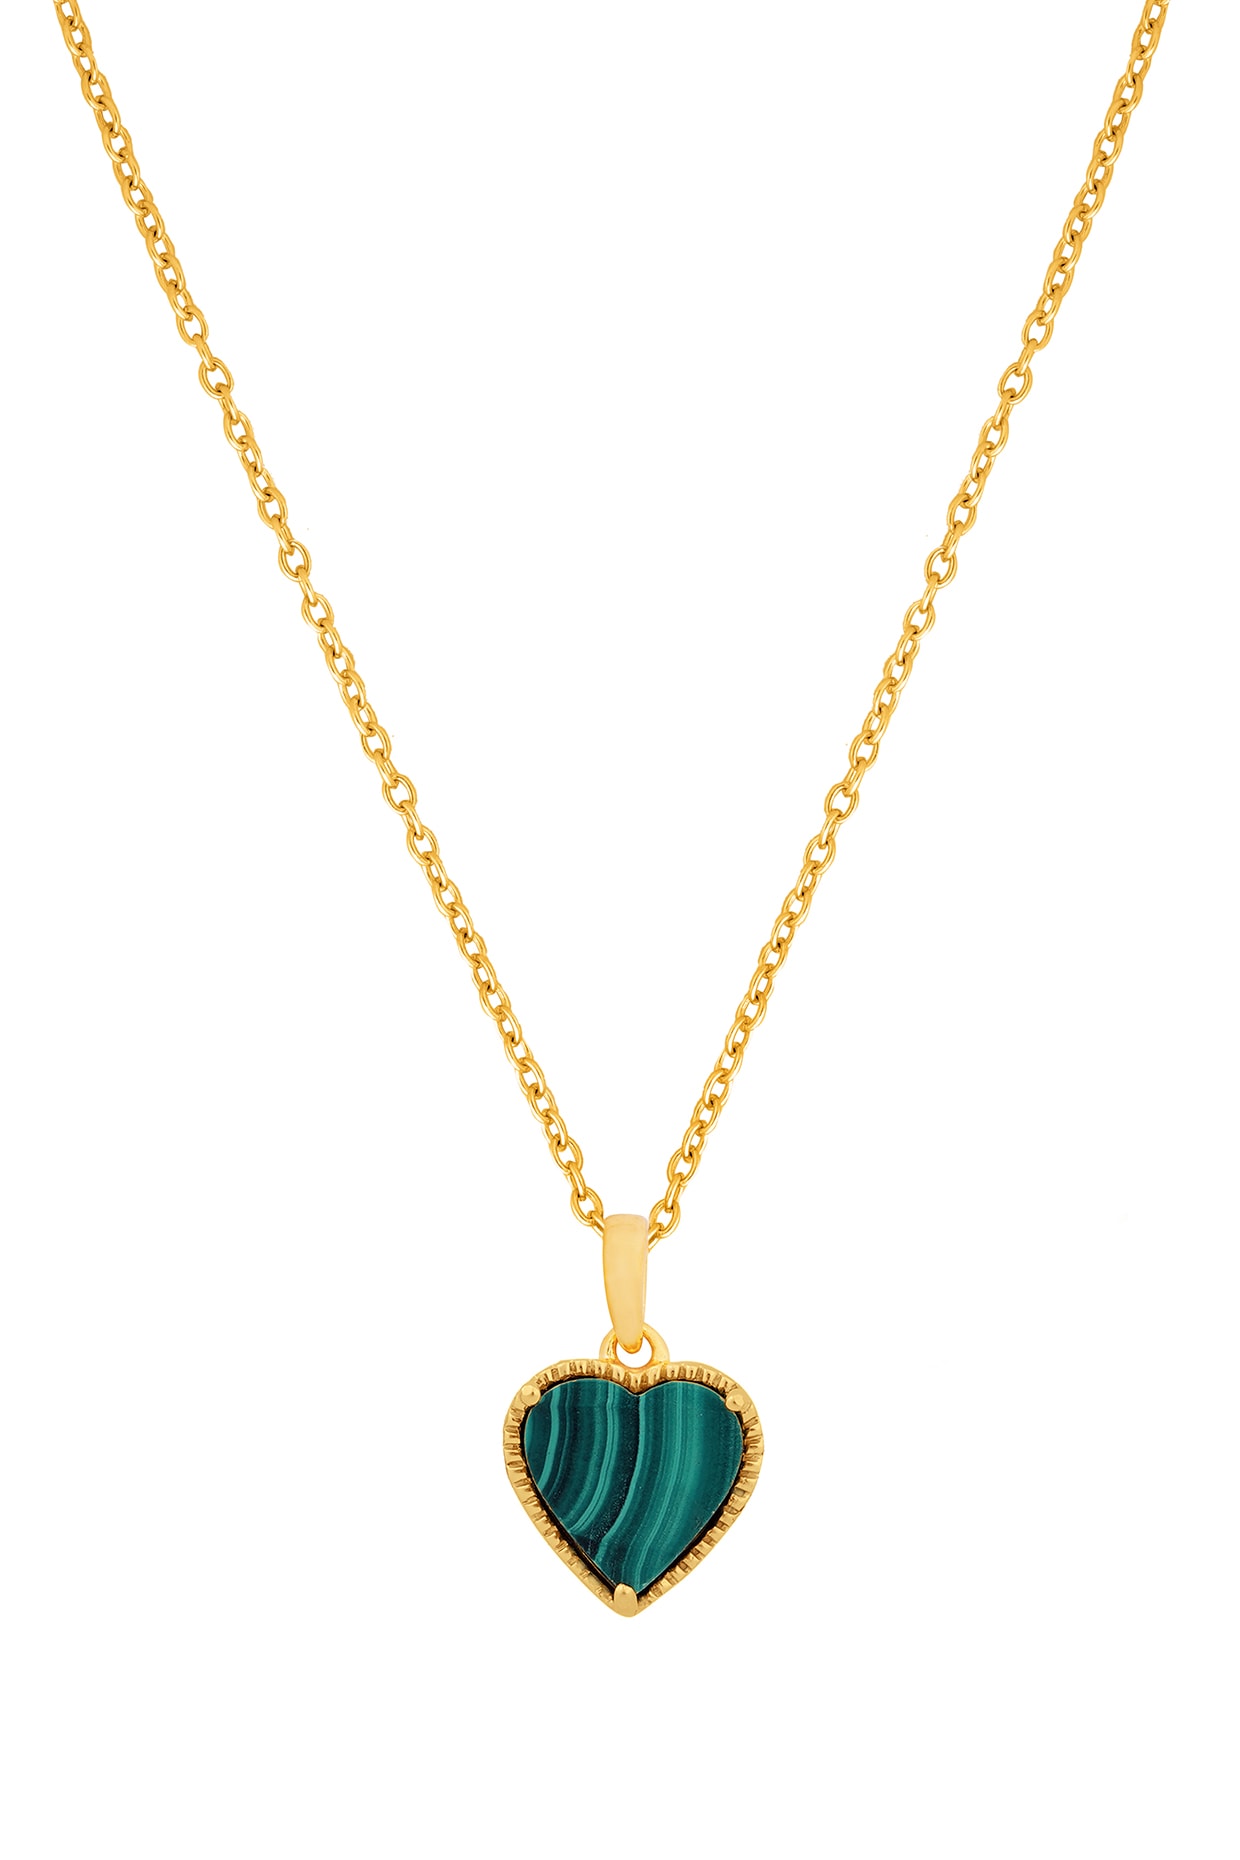 Malachite Heart Necklace with White Crystal Pave | Pave heart necklace, Malachite  pendant, Heart necklace